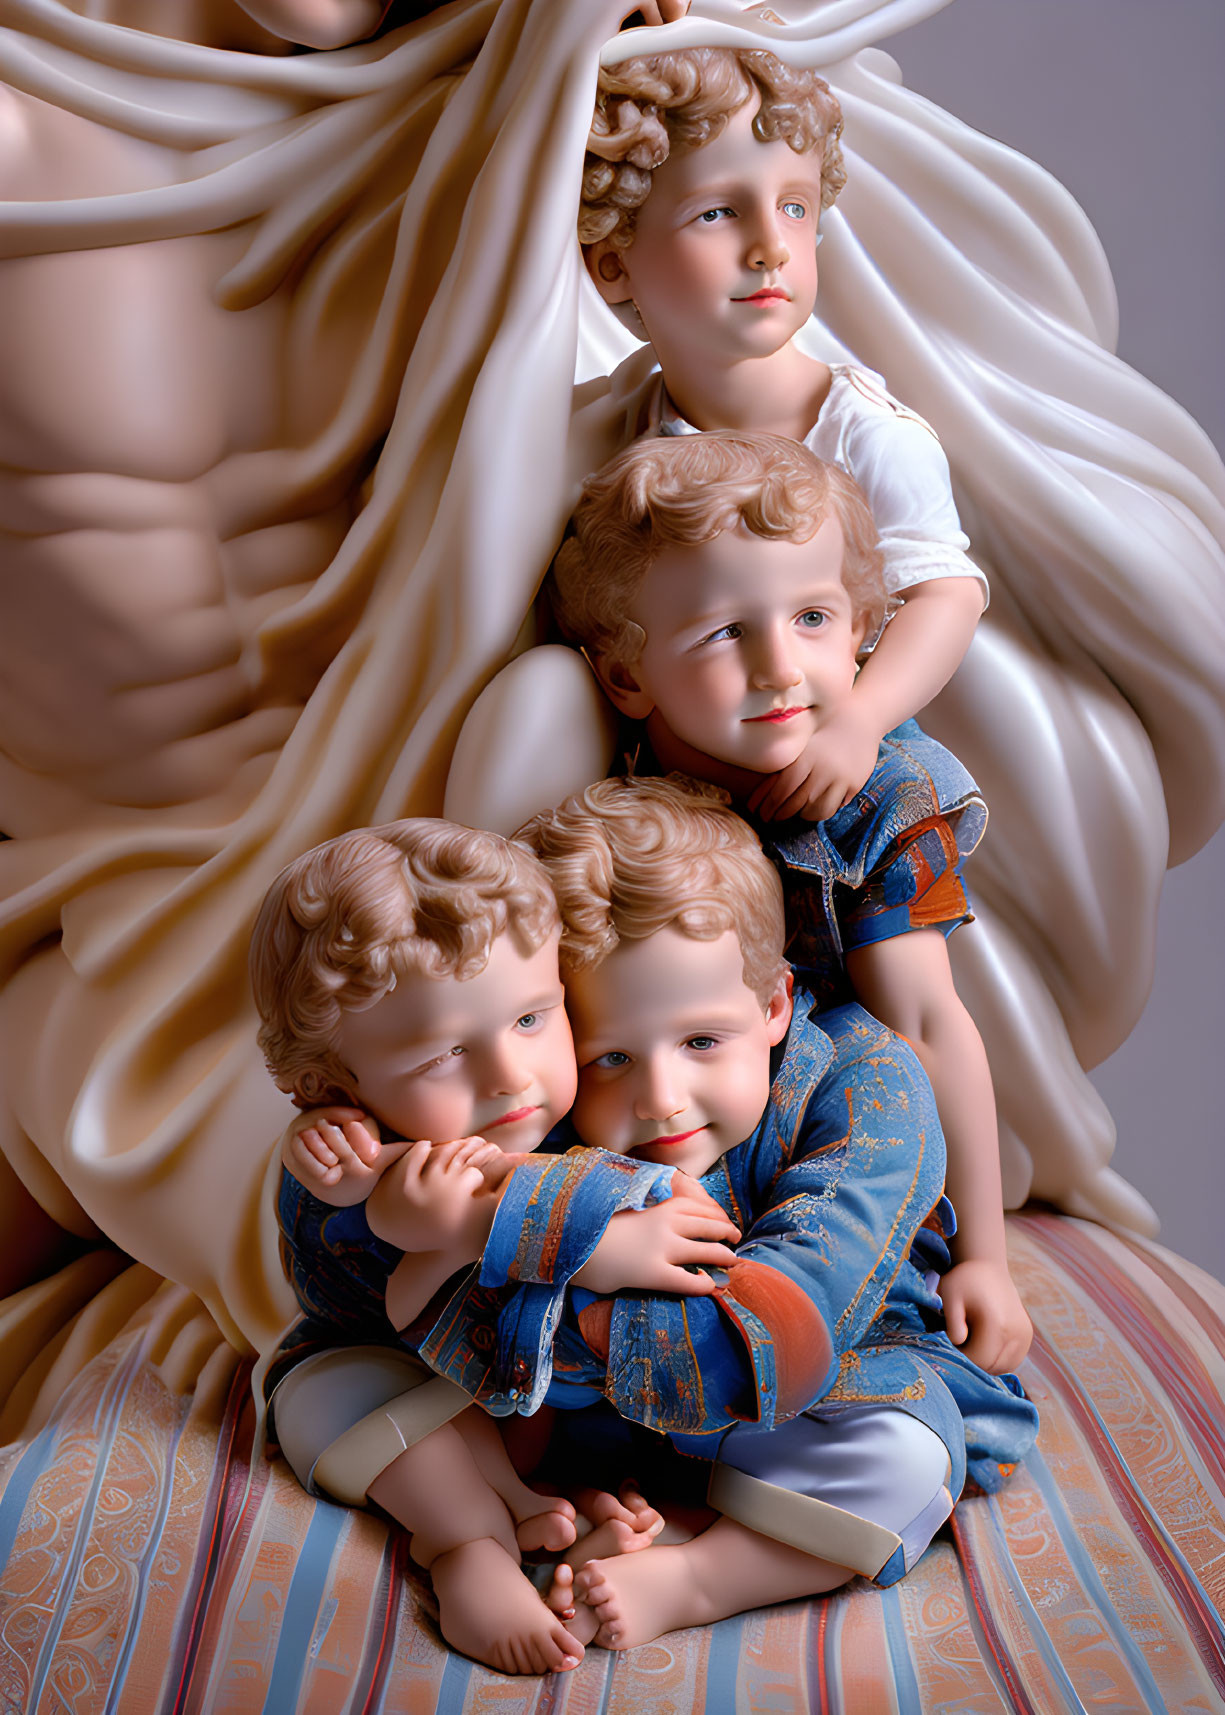 Curly-Haired Children Embracing in Denim Clothes with Classical Sculpture Backdrop